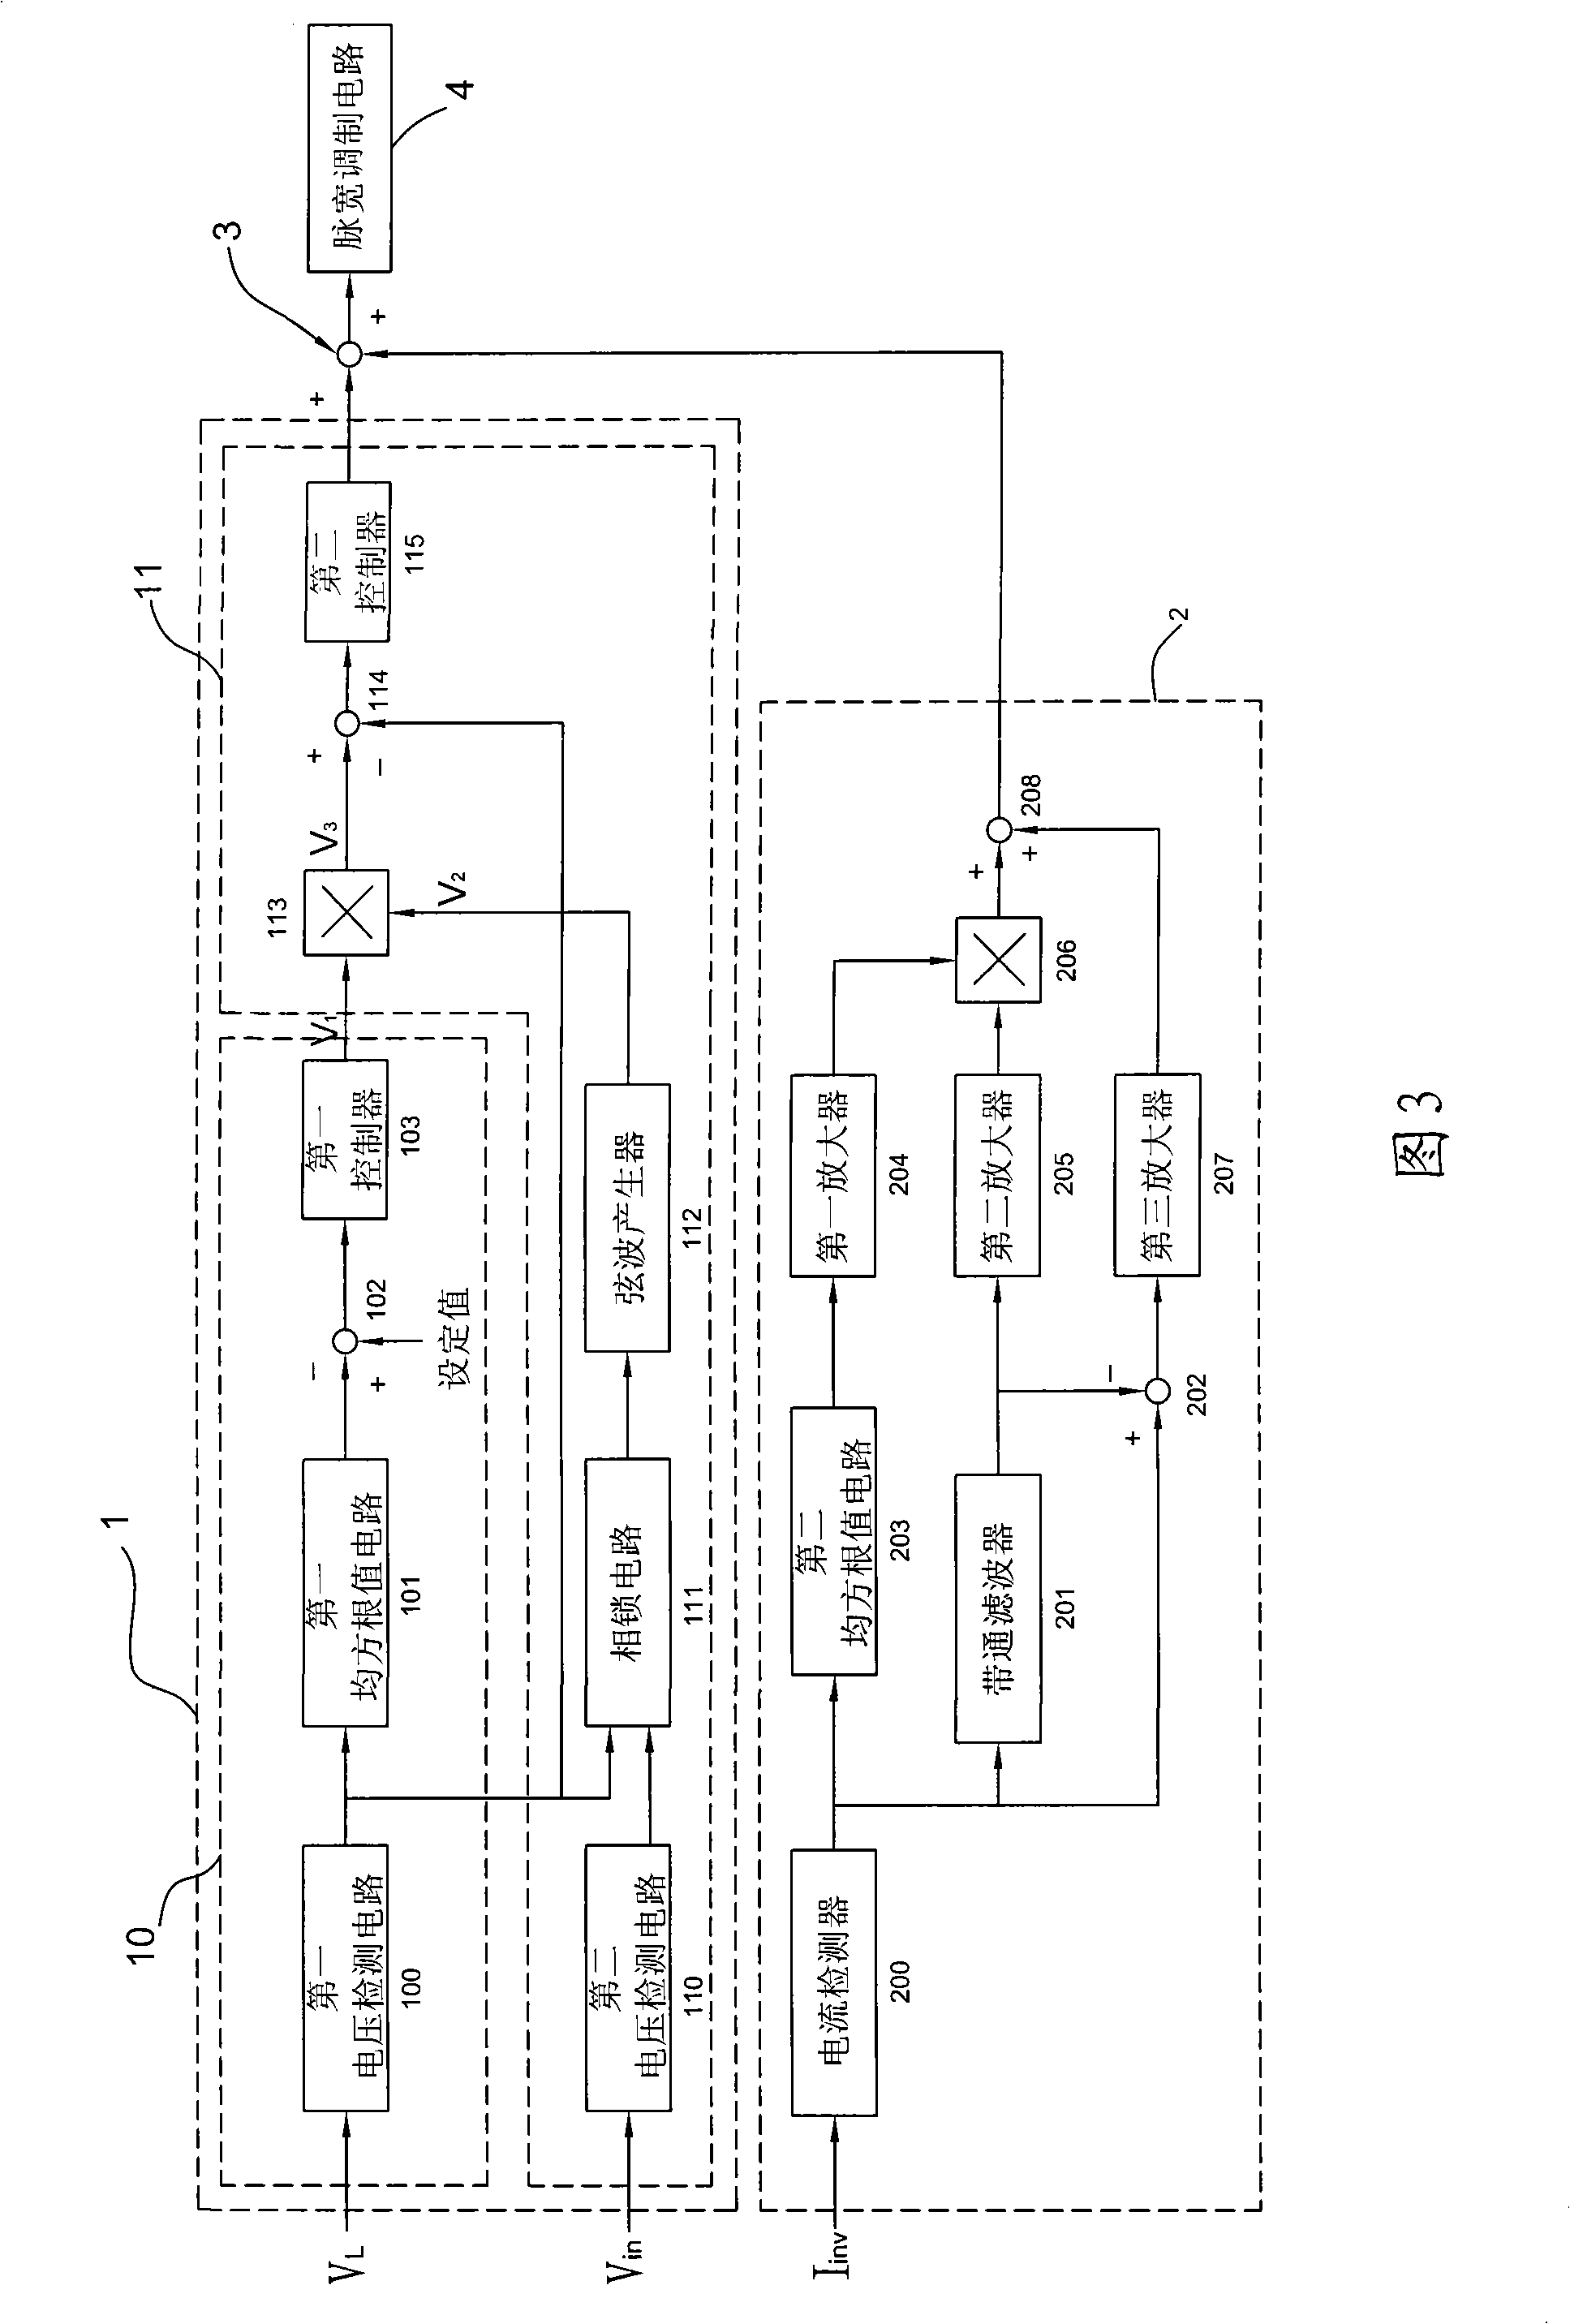 Uninterrupt power supply system with parallel operation function